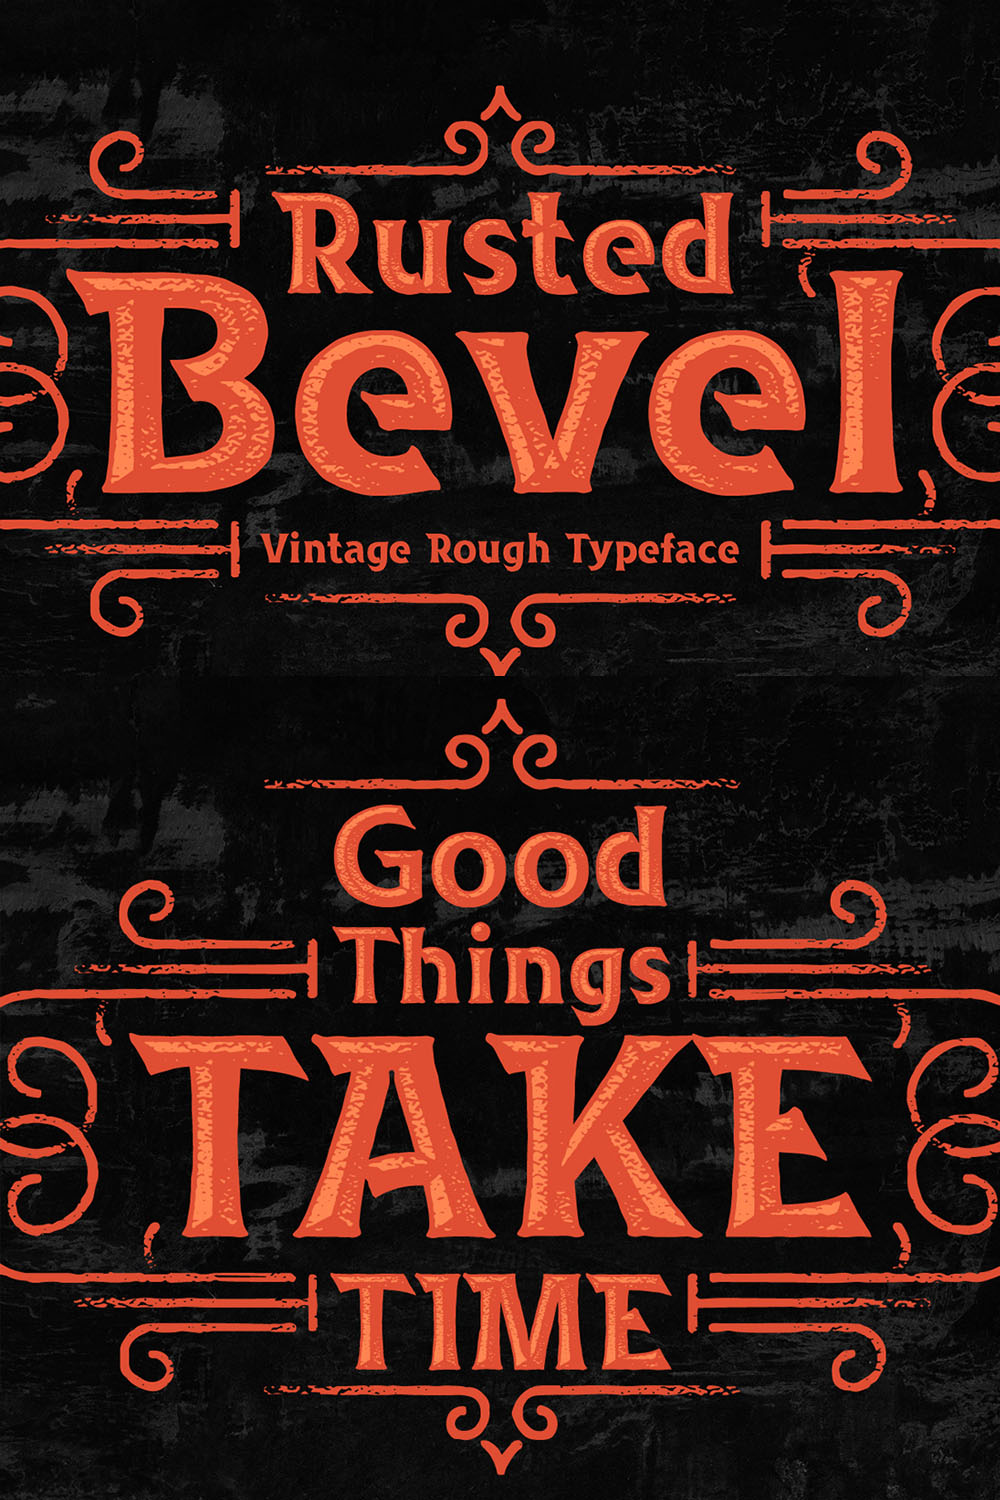 Rusted Bevel Typeface Pinterest Collage image.